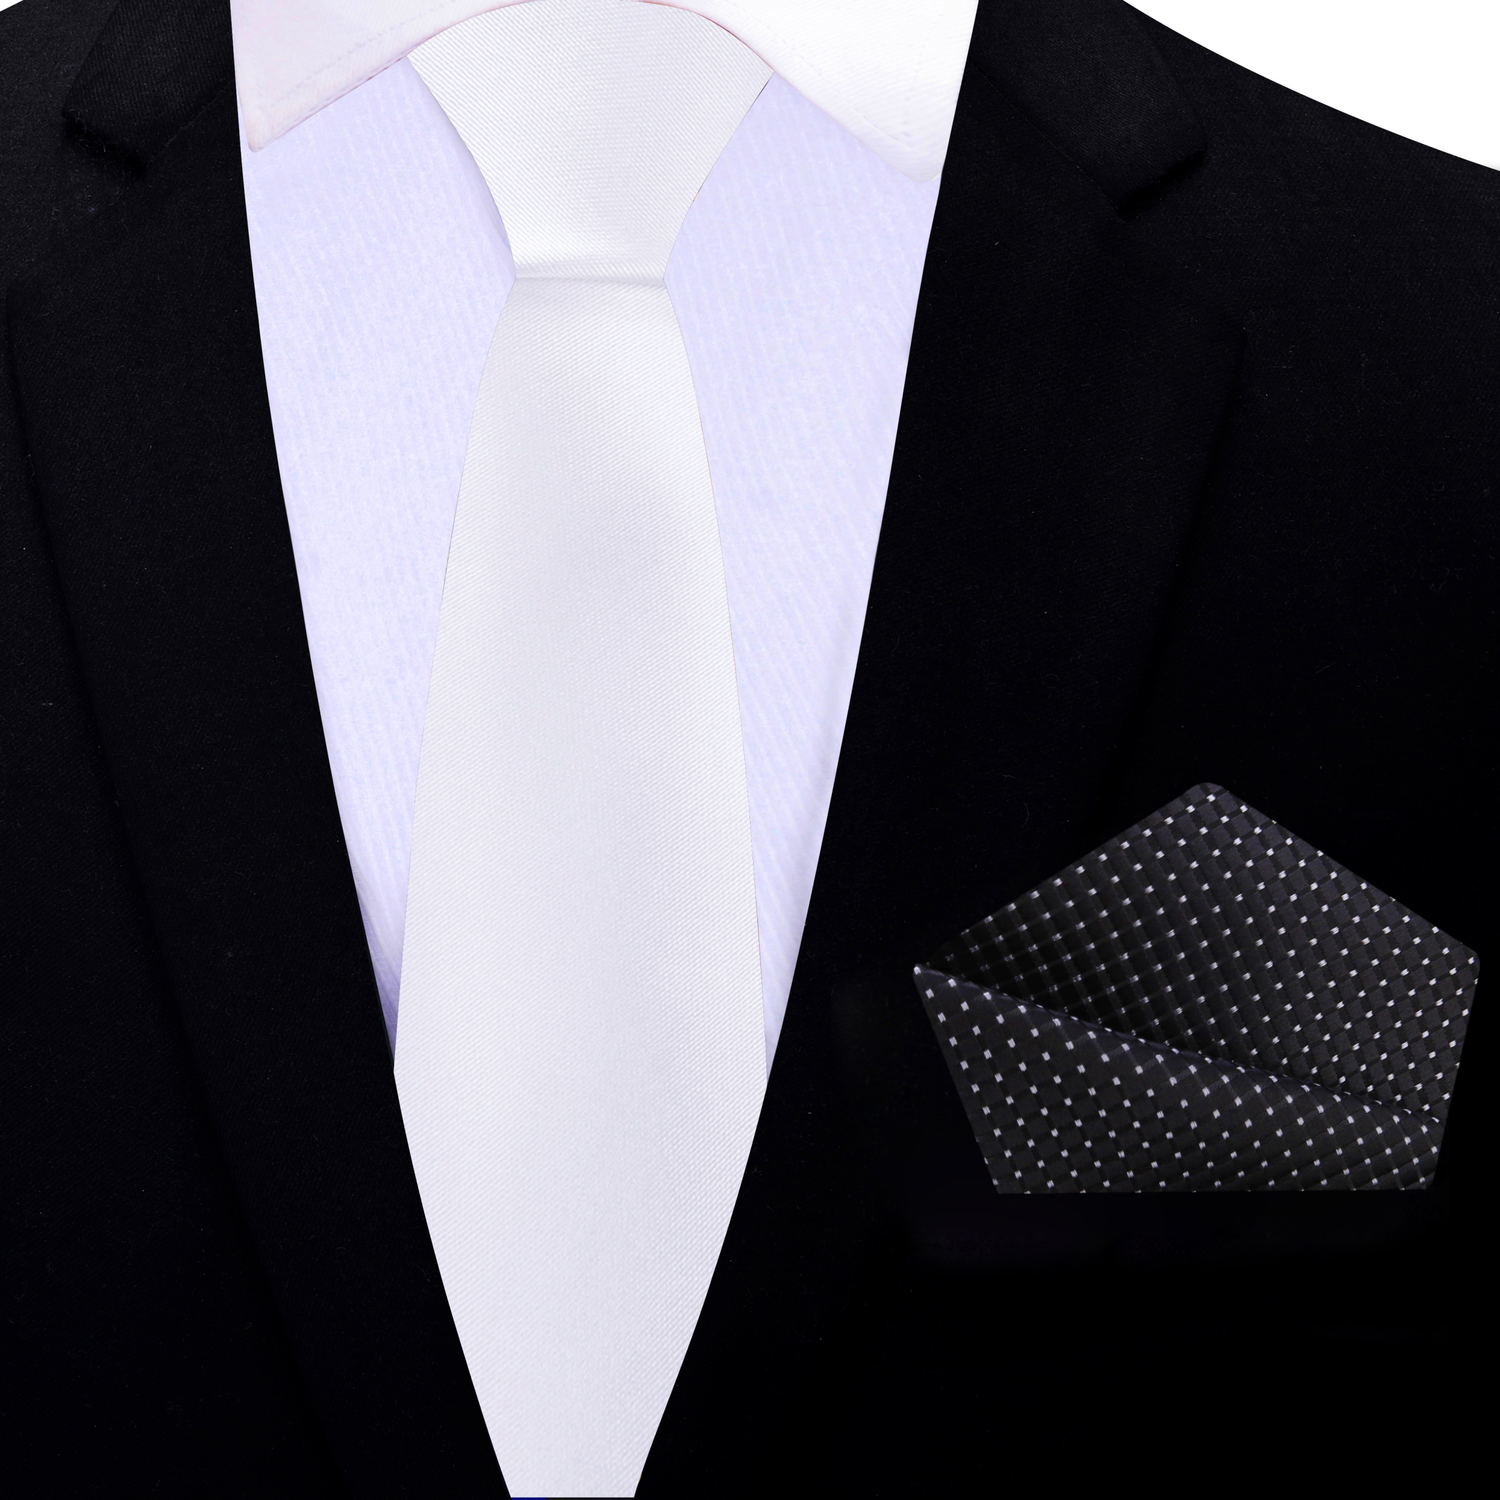 Thin Tie: Solid White Tie with Black Check Square